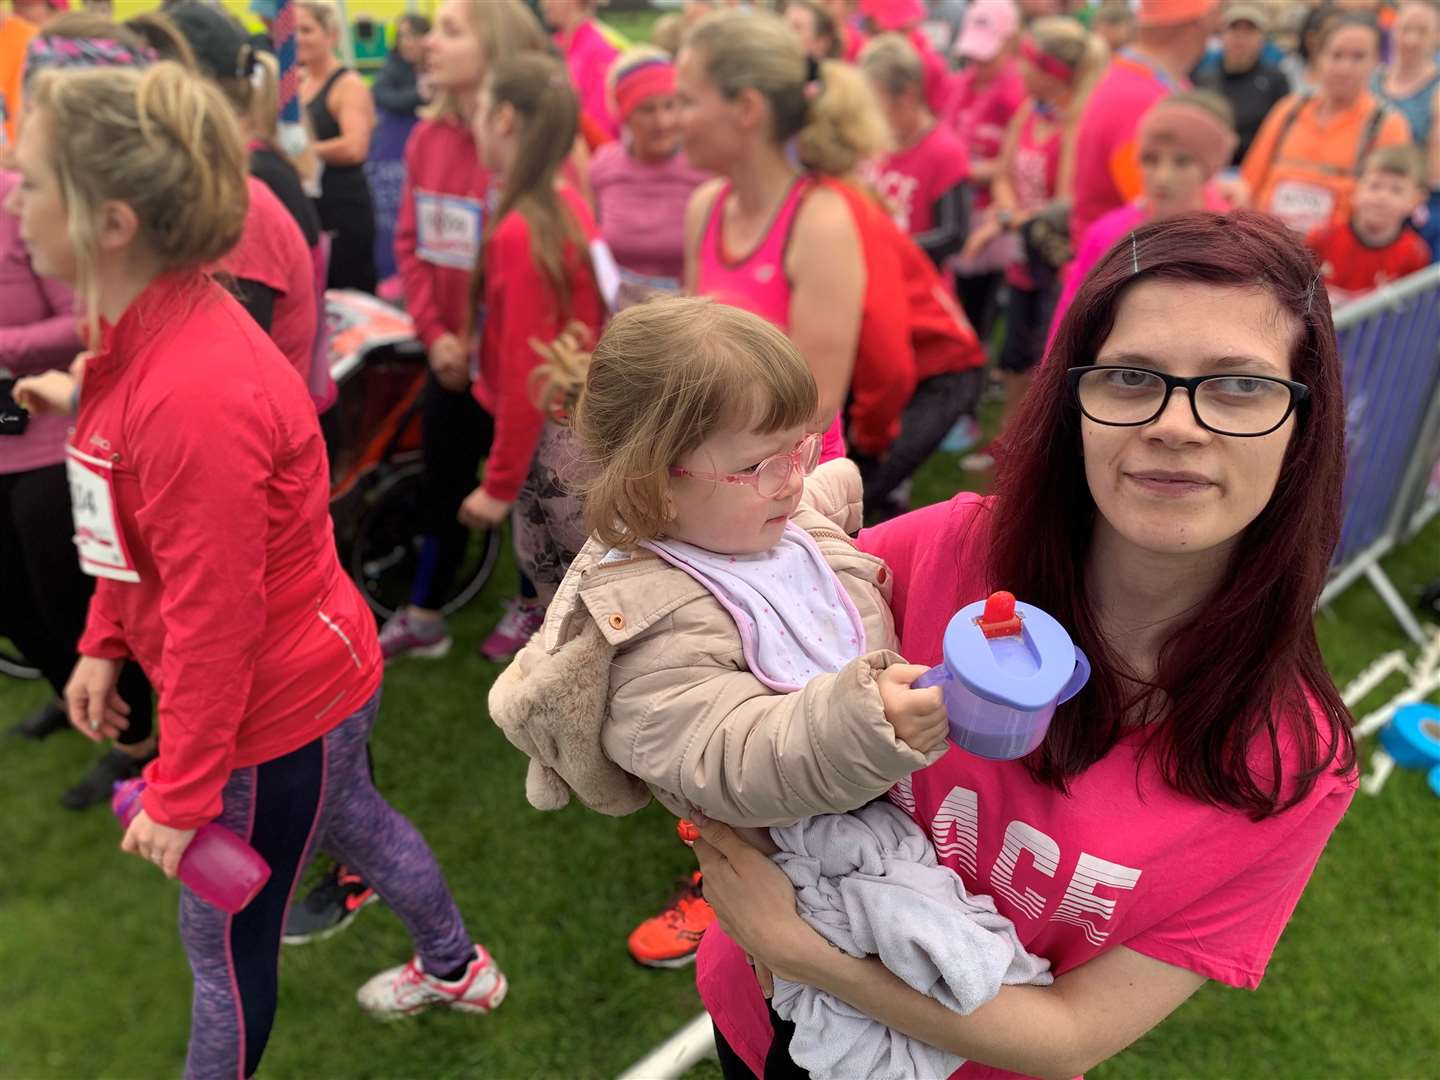 A previous Race for Life event.